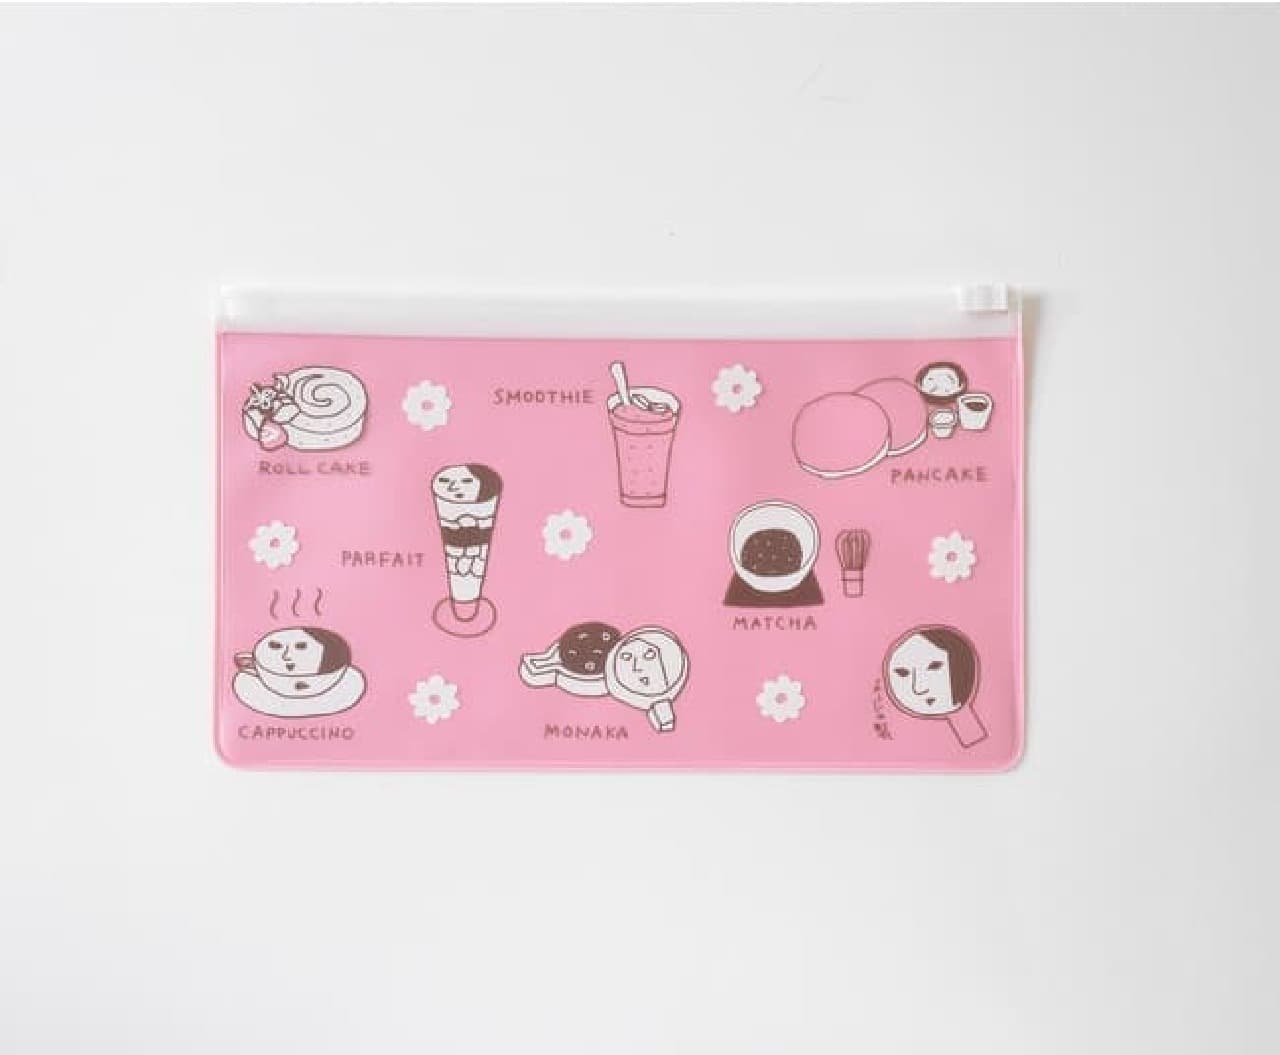 Released "Yojiya Zipper Case Pink" --For masks and amenities